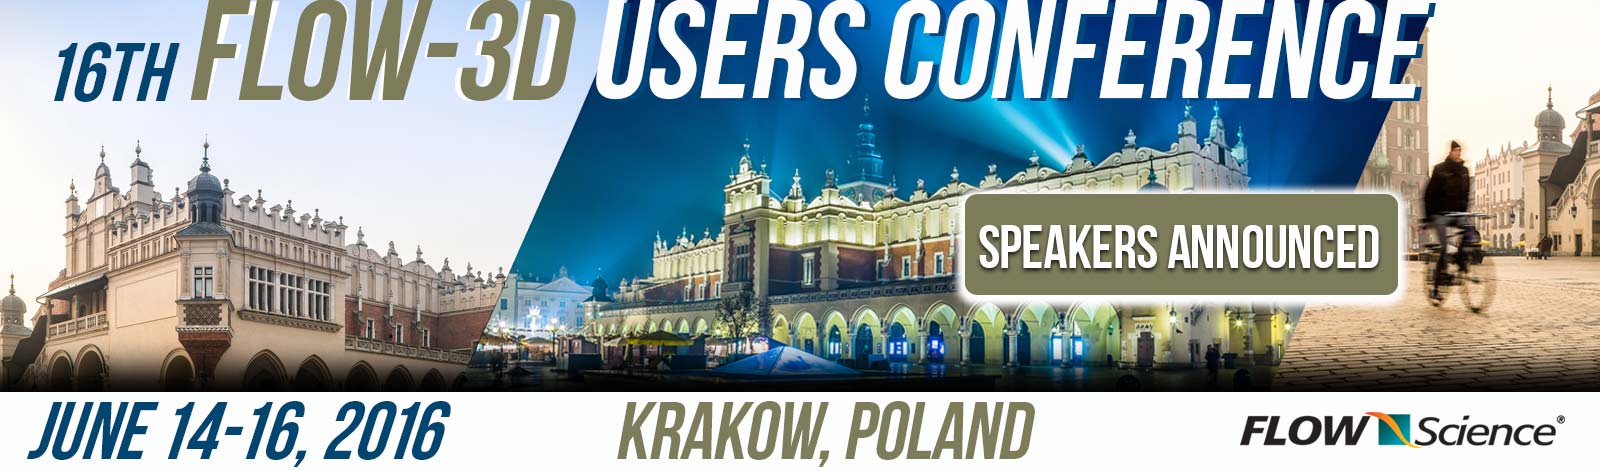 16th-FLOW3D-european-users-conference